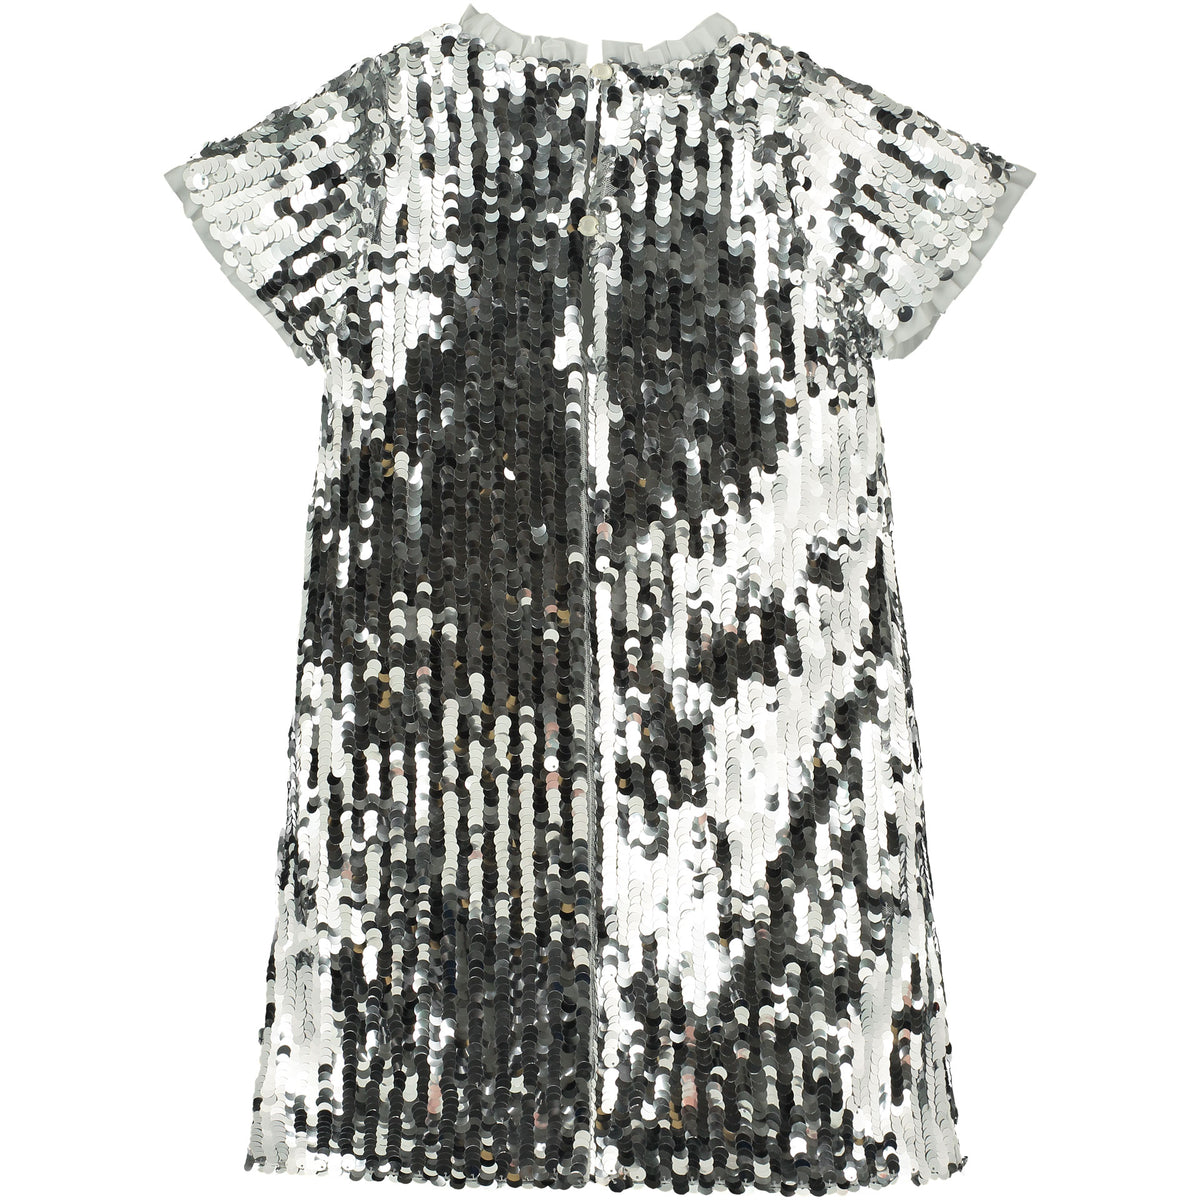 Girls Party Dress Coco Sequin Silver | Holly Hastie London